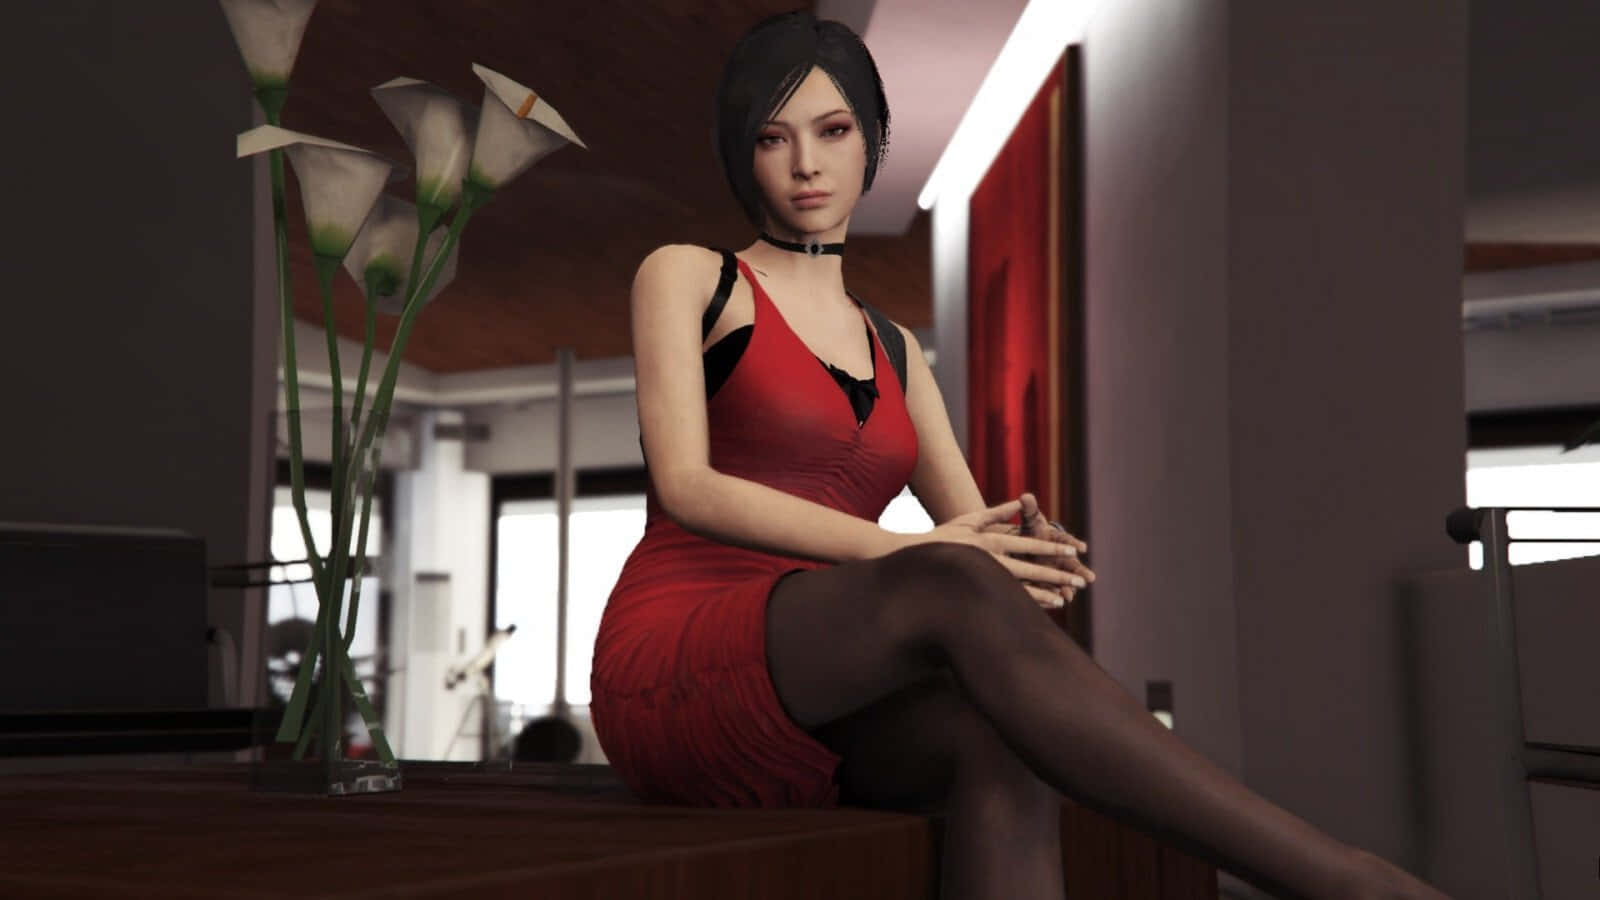 "ada Wong - The Mysterious Operative From Resident Evil" Wallpaper